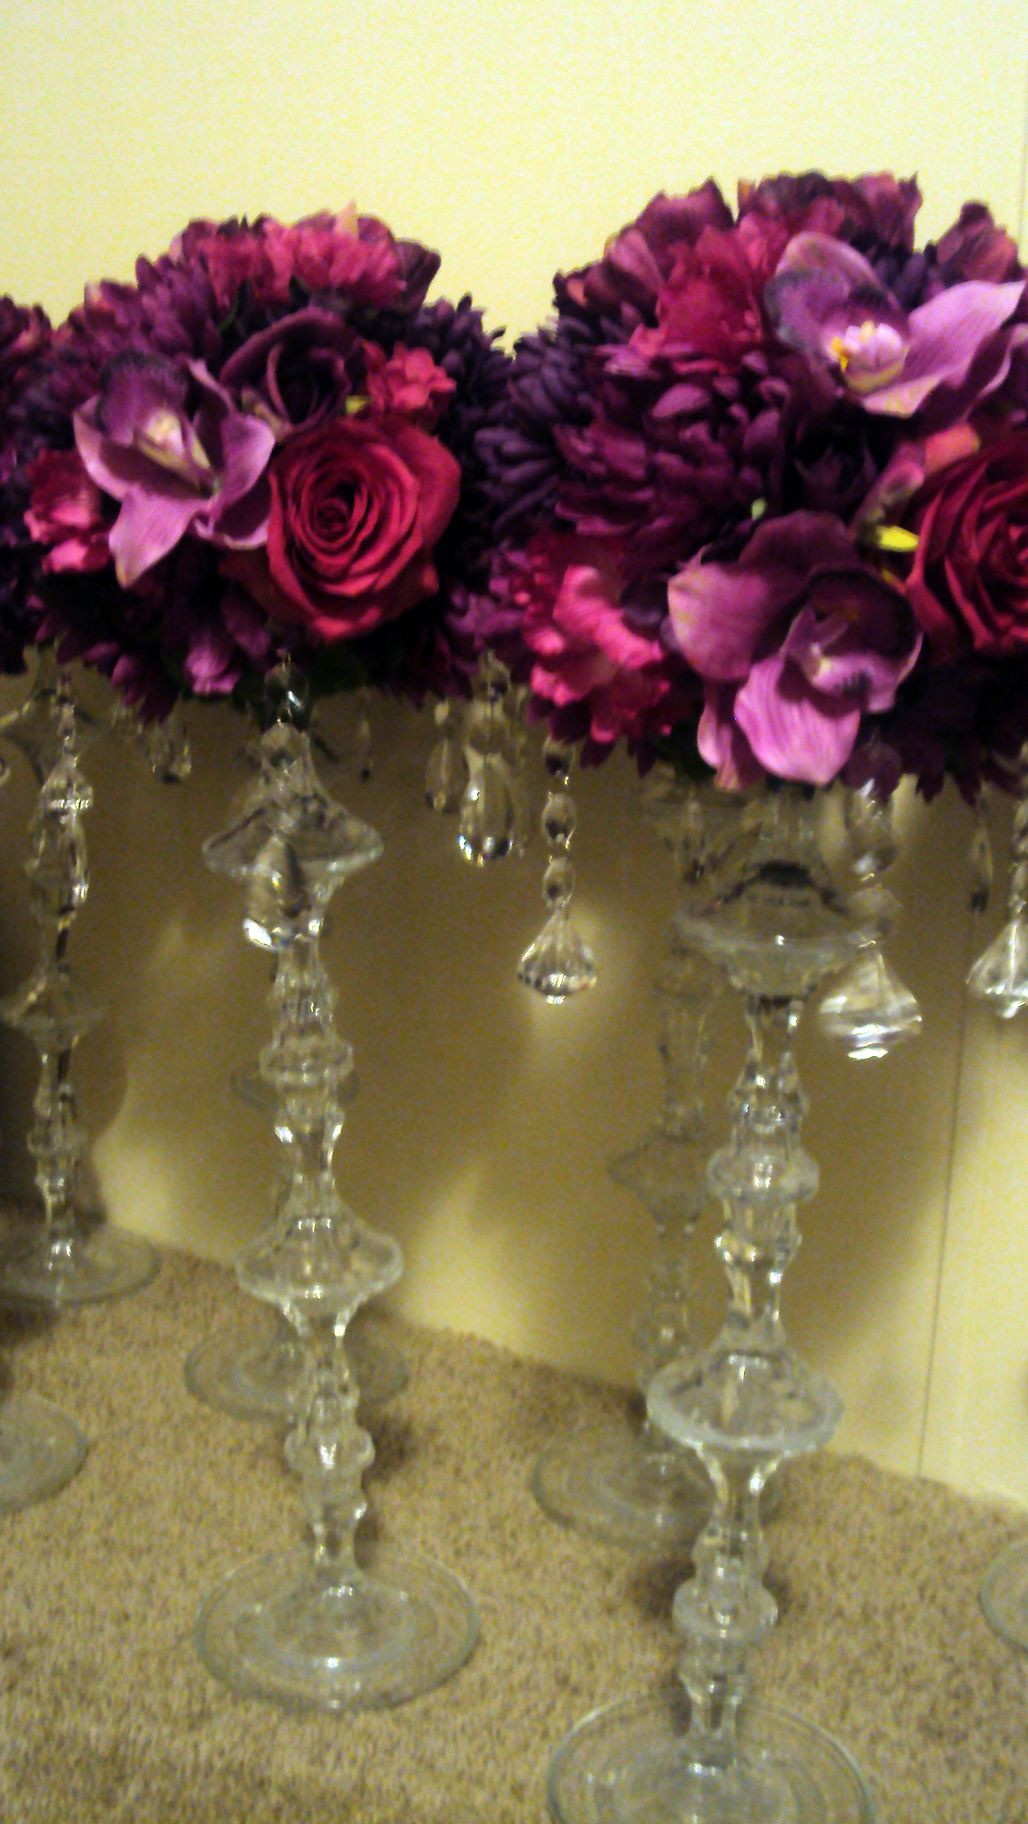 DIY Dollar Store Wedding Centerpieces
 Deep purples add in some gold dollar store candle holders